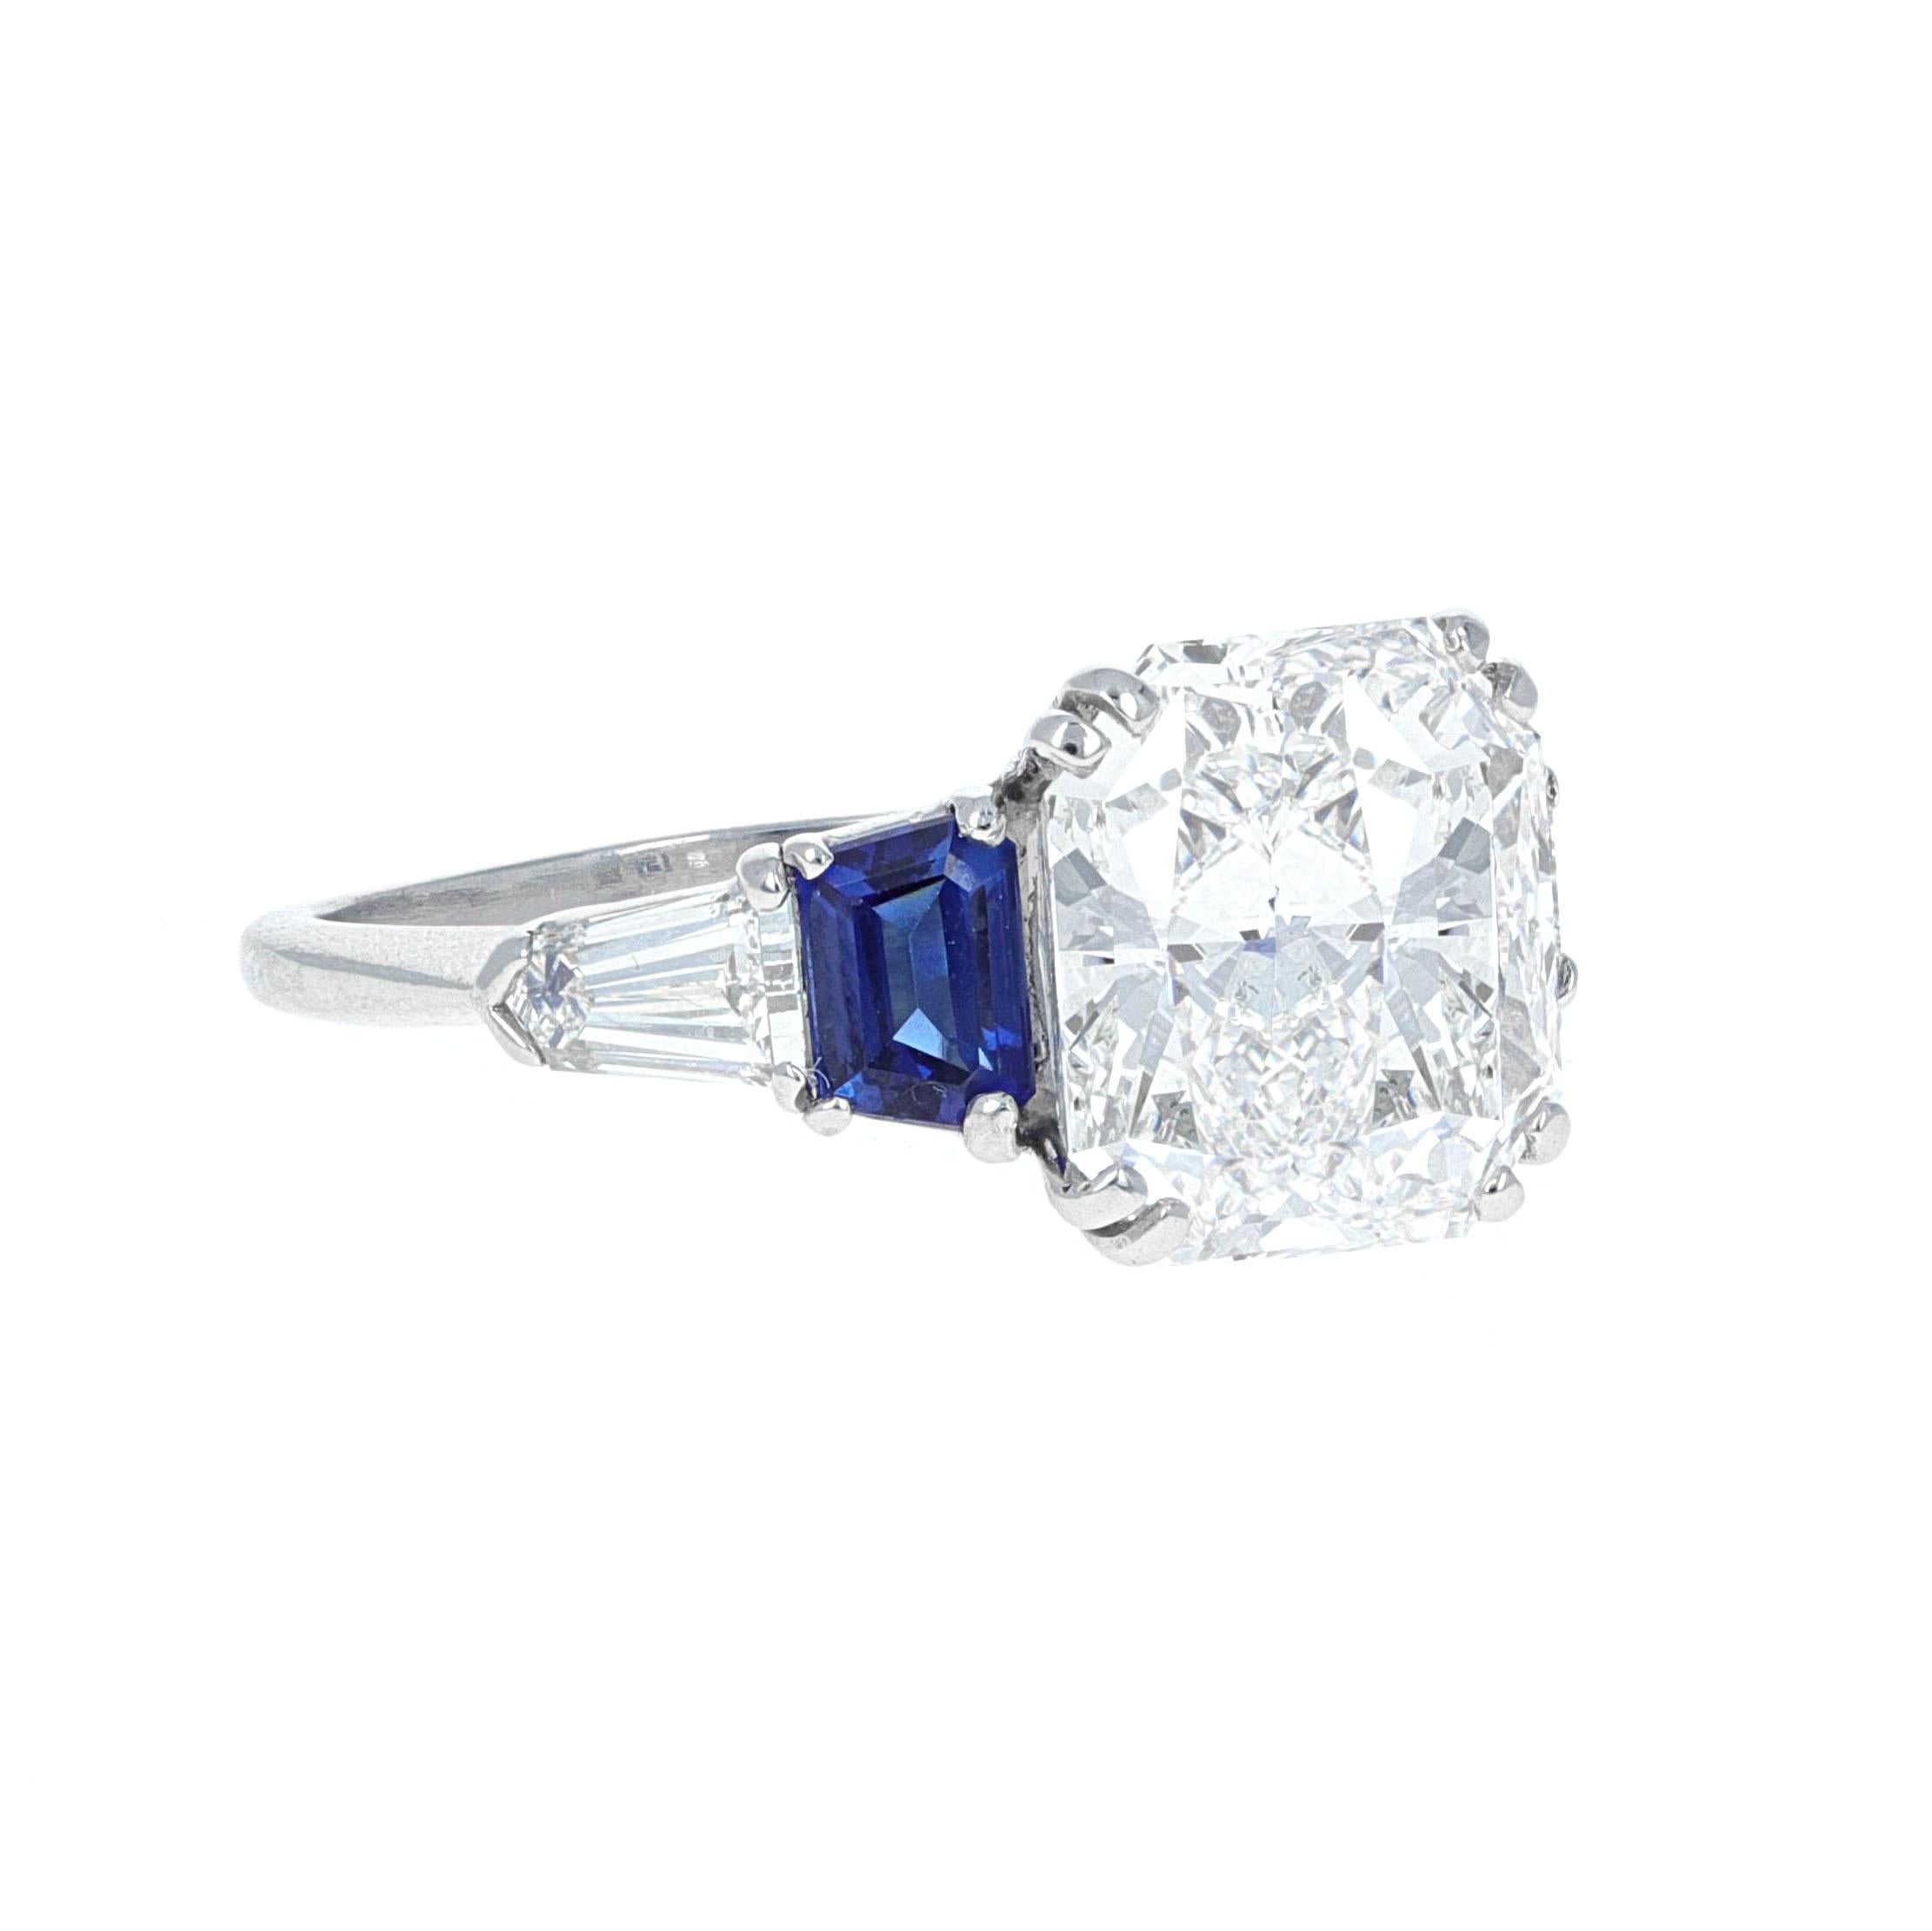 GIA Certified, beautifully made platinum 5.00 carat radiant cut diamond and sapphire ring. The center stone is certified by the Gemoligival Institute of America, GIA. The report states that the center diamond weighs 5.00 carats and is a cut cornered